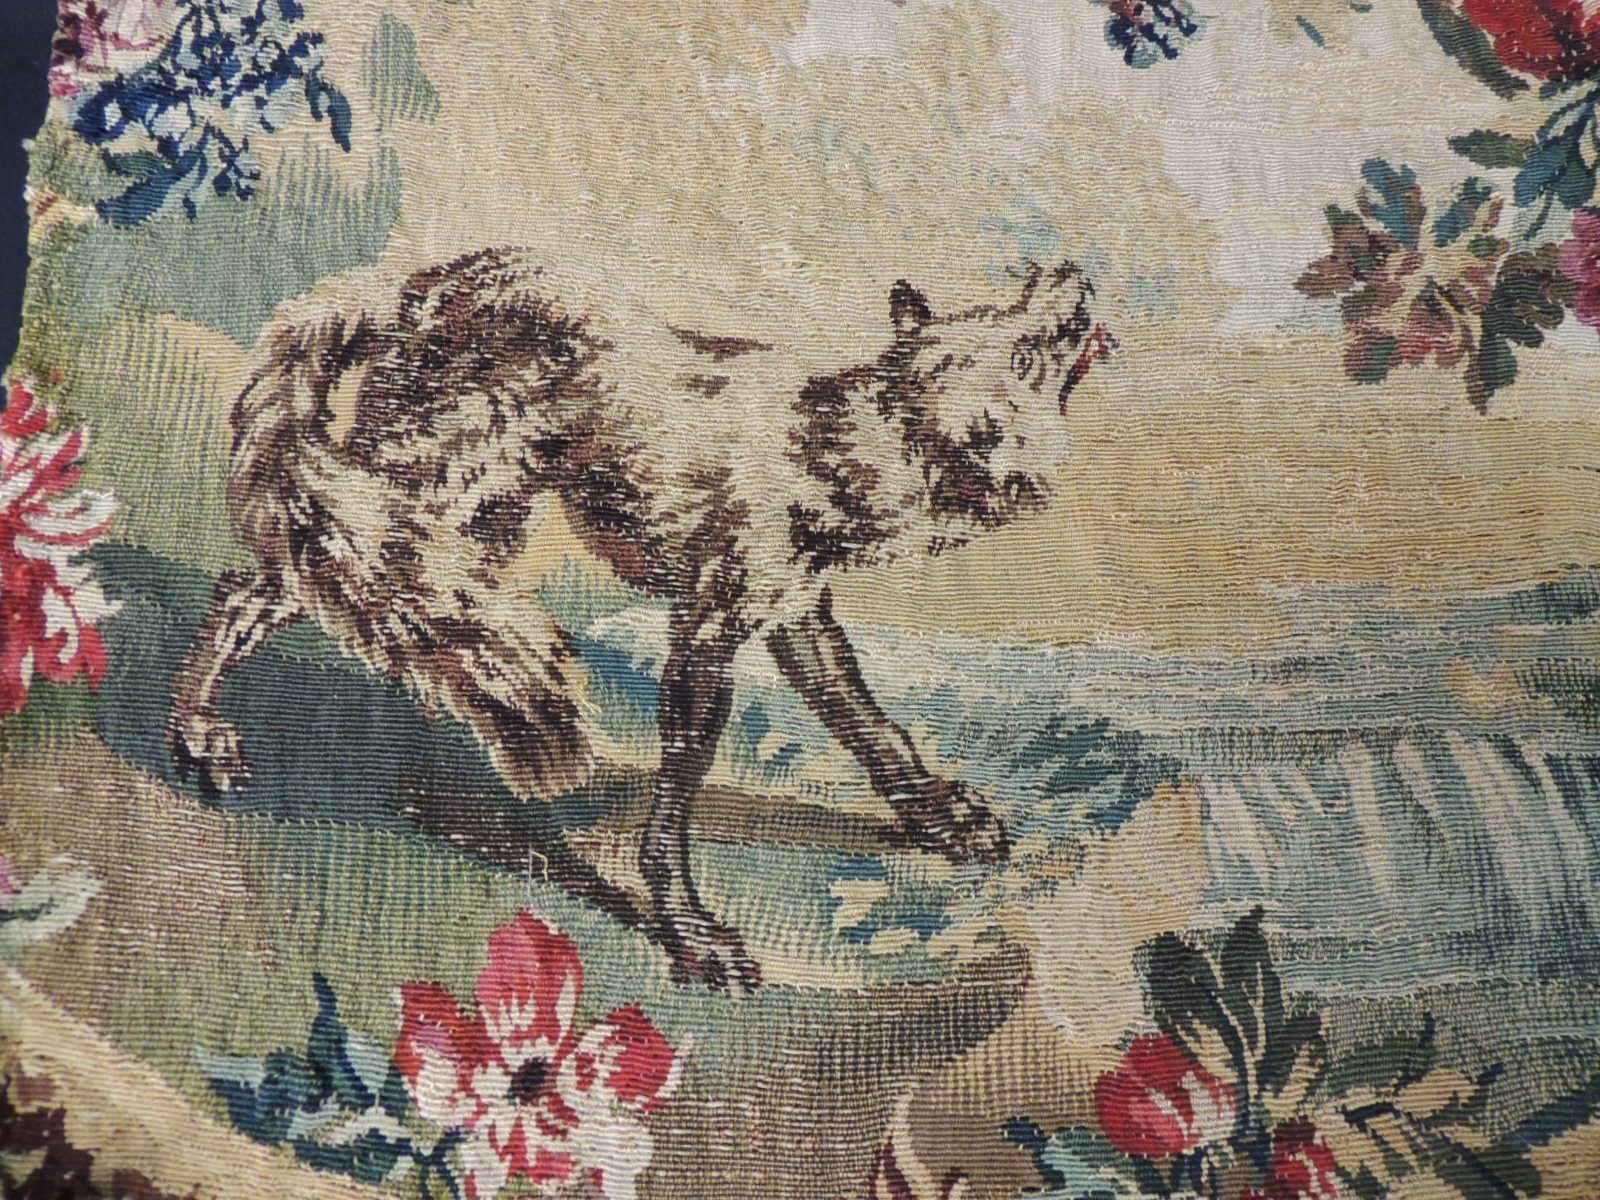 Antique Aubusson Oval Tapestry Fragment.
Woven tapestry depicting wolf trying to get grapes from tree.
Colorful tapestry in shades of blue, red, green, gold, brow and pink.
Ideal for a pillow or chair backing.
Sold as is.
Size: 16